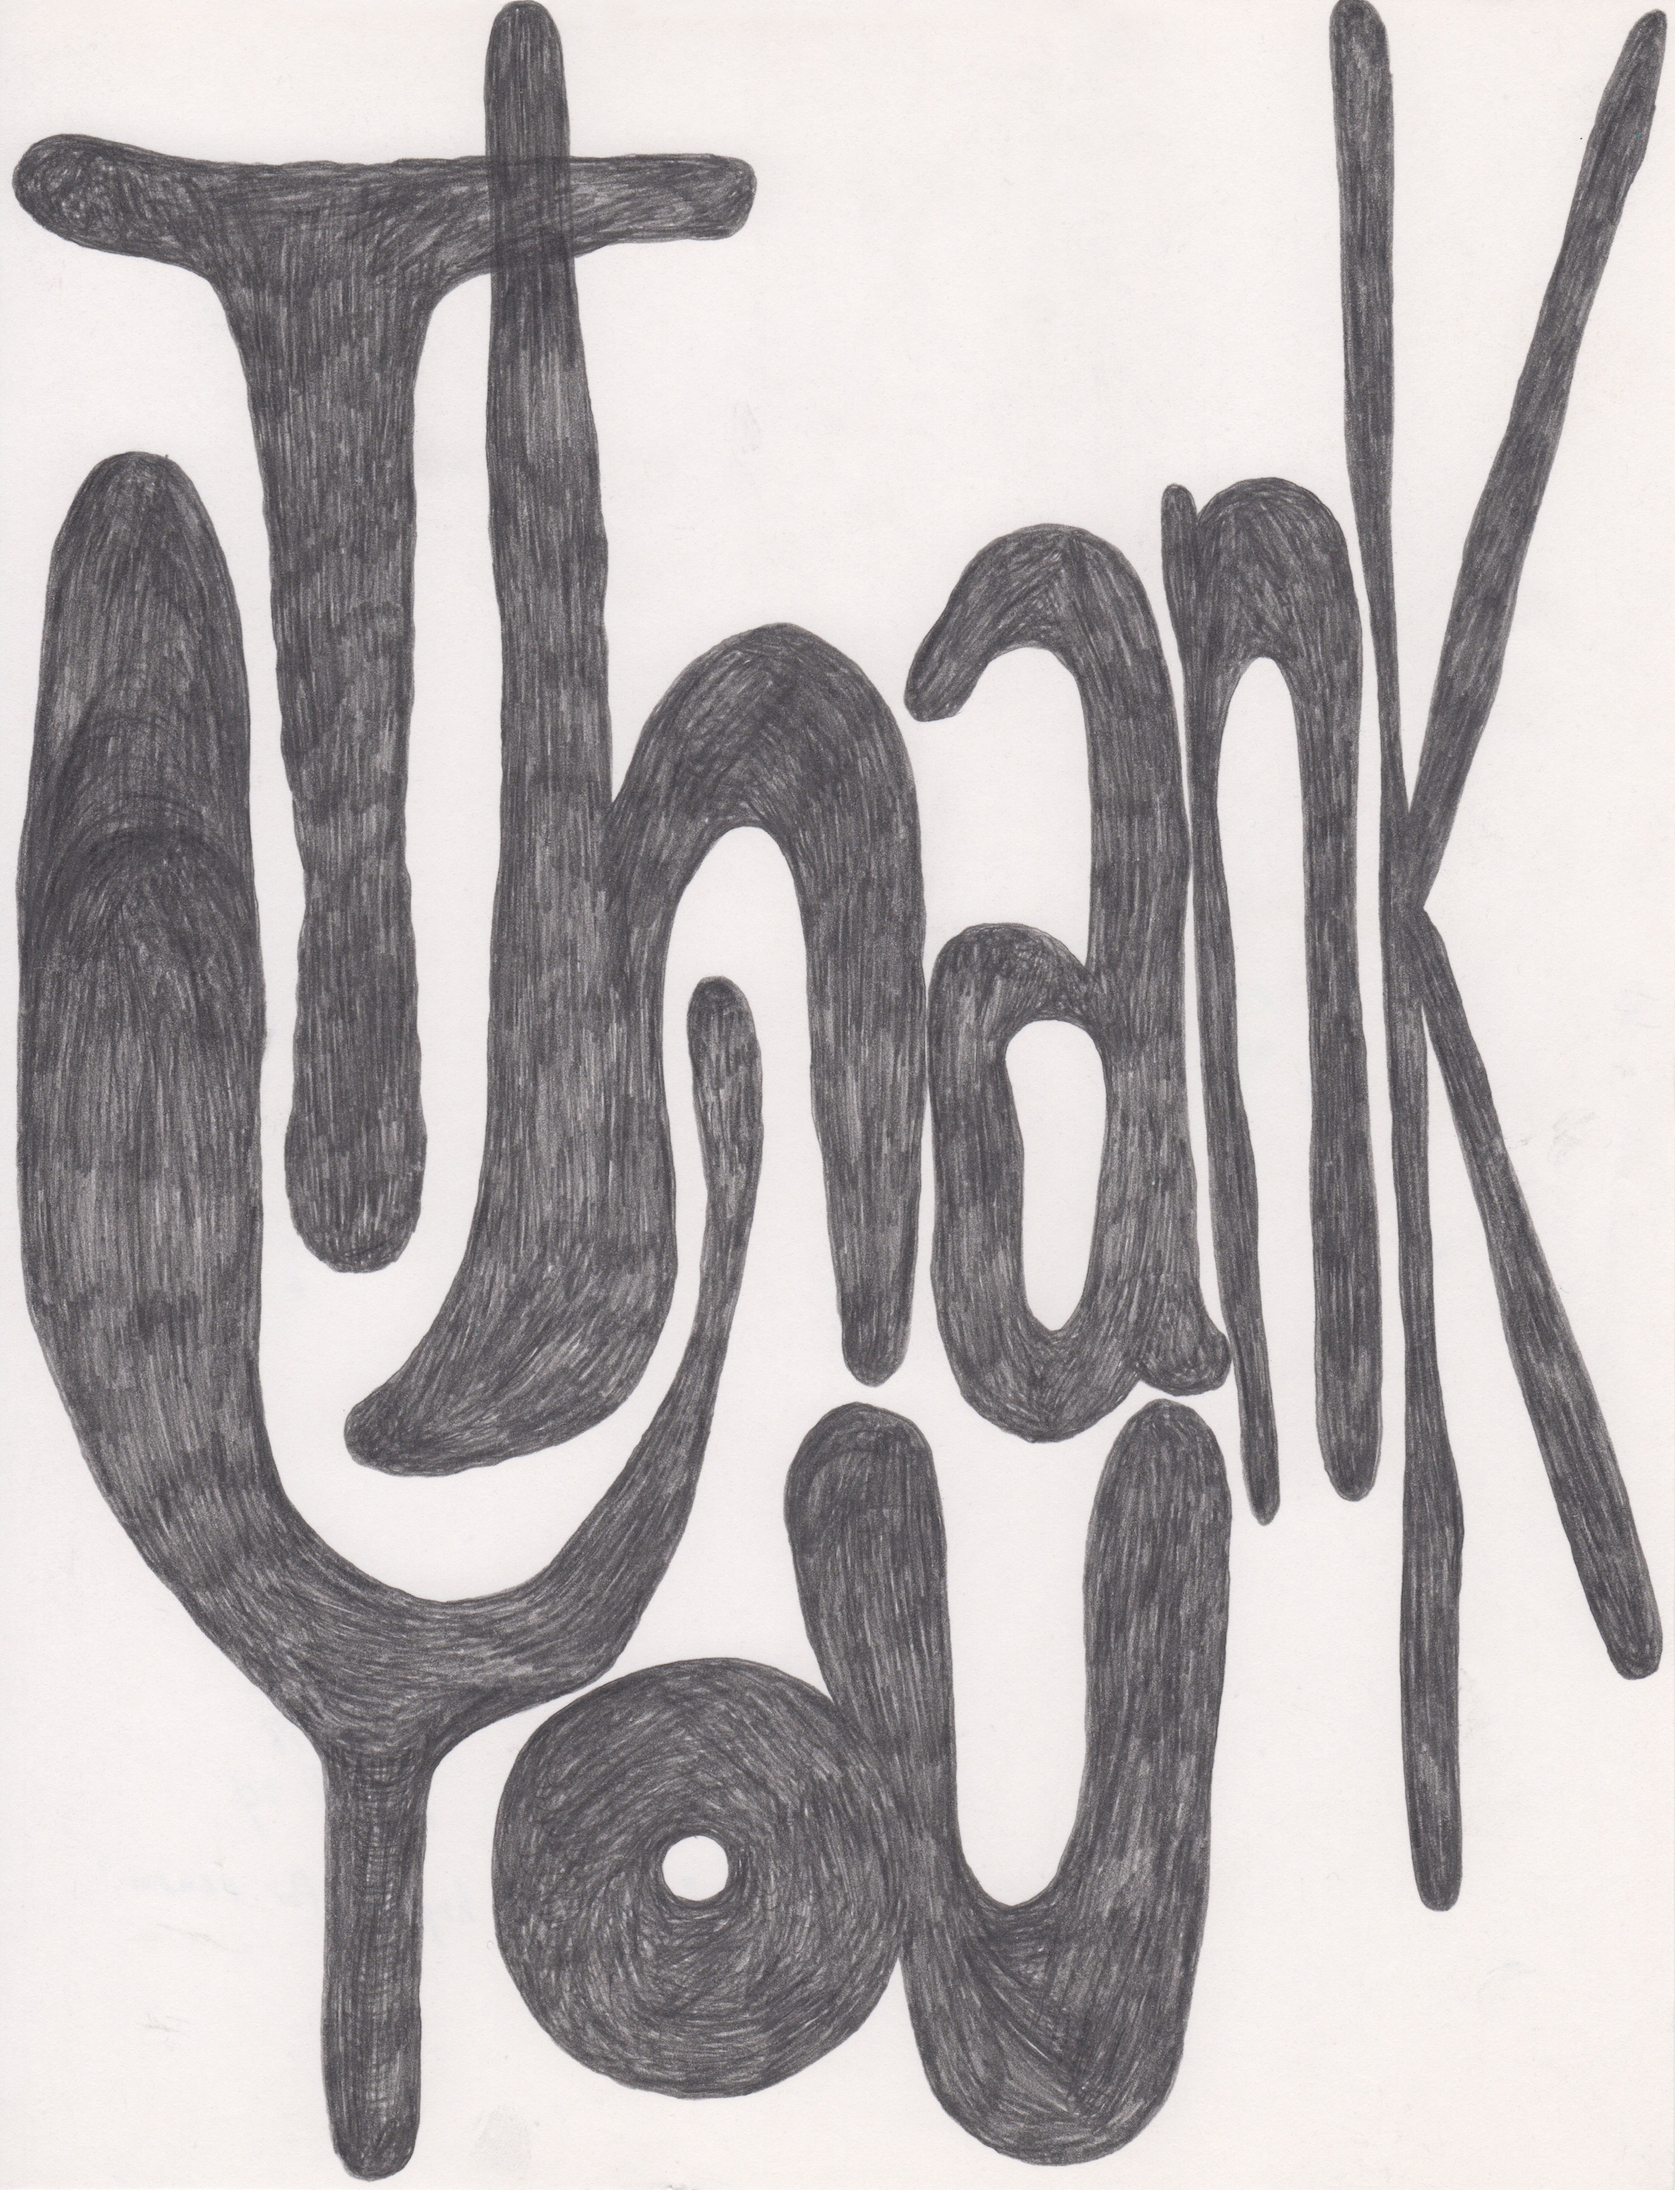    Thank You  , 2018 Pencil on paper 11x8.5 in 